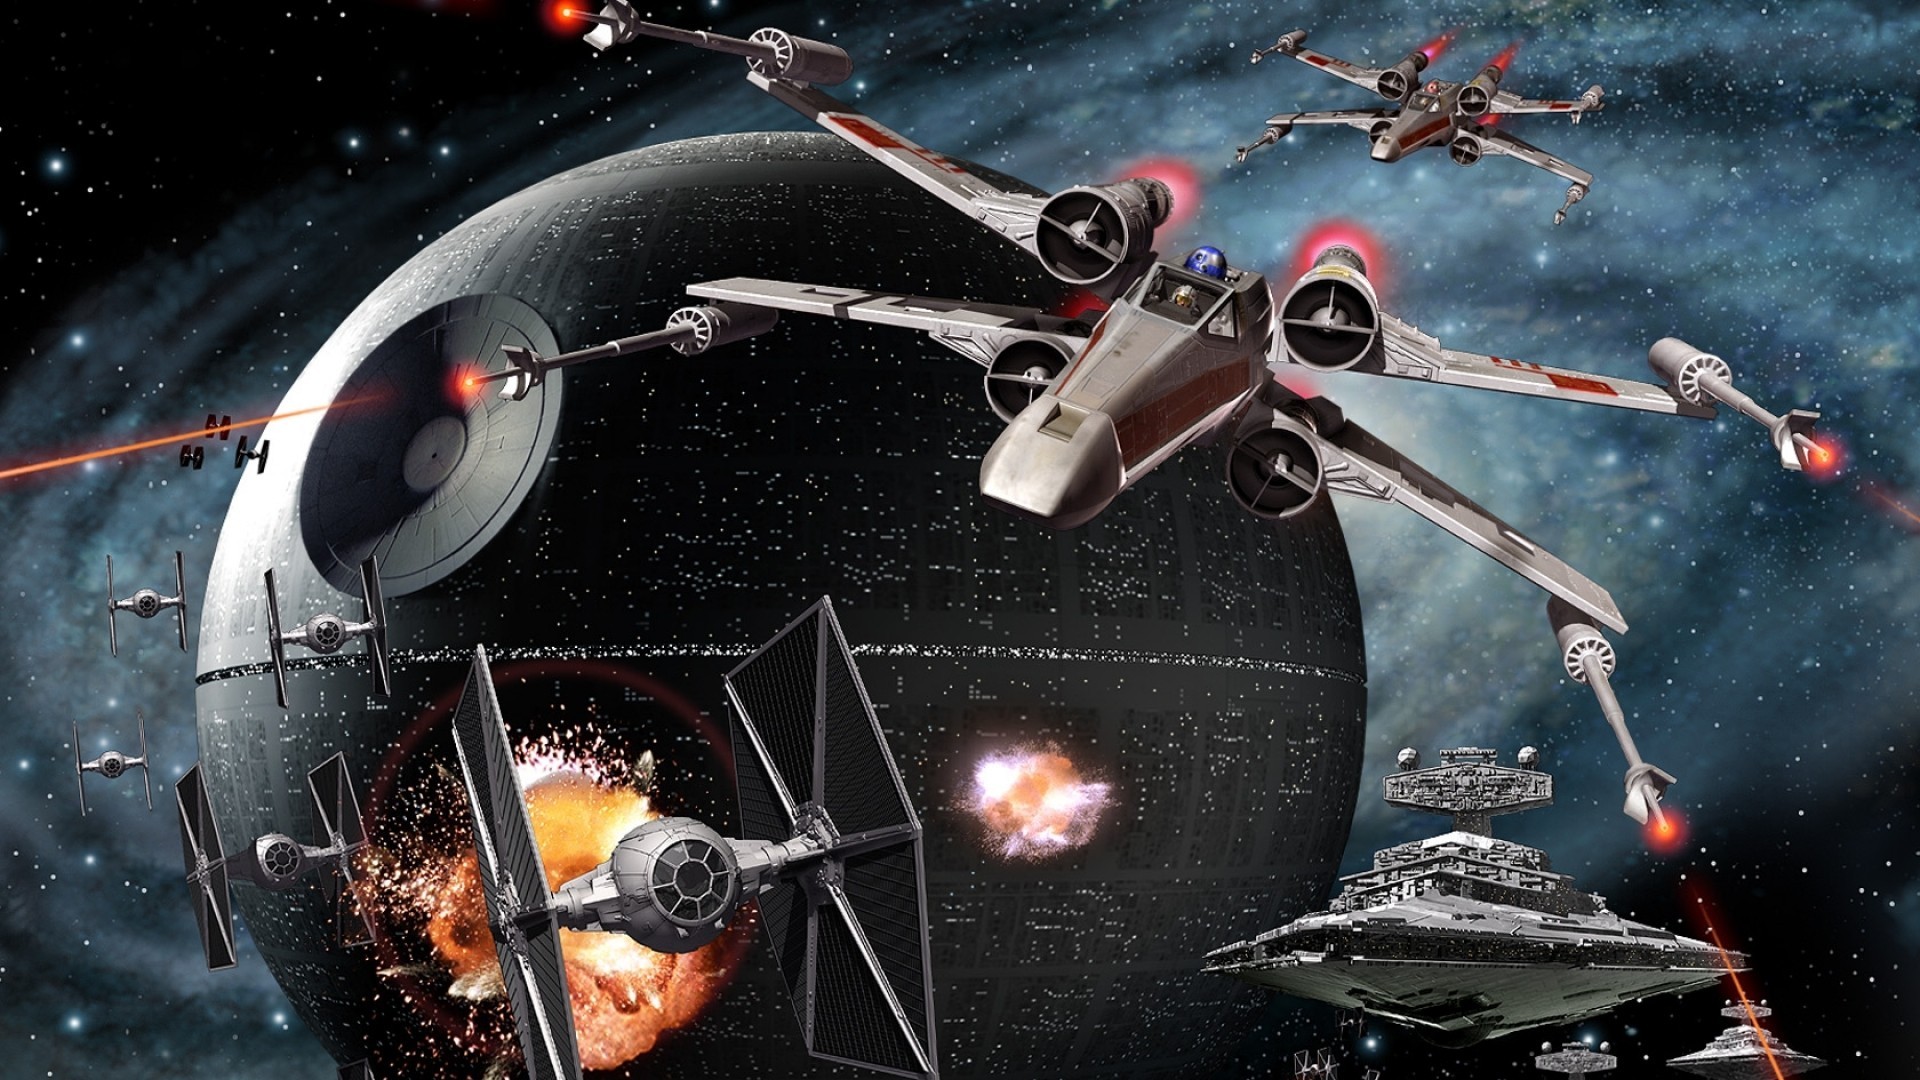 General 1920x1080 Star Wars: Empire at War artwork video games Death Star X-wing TIE Fighter Star Destroyer Star Wars PC gaming video game art science fiction Star Wars Ships